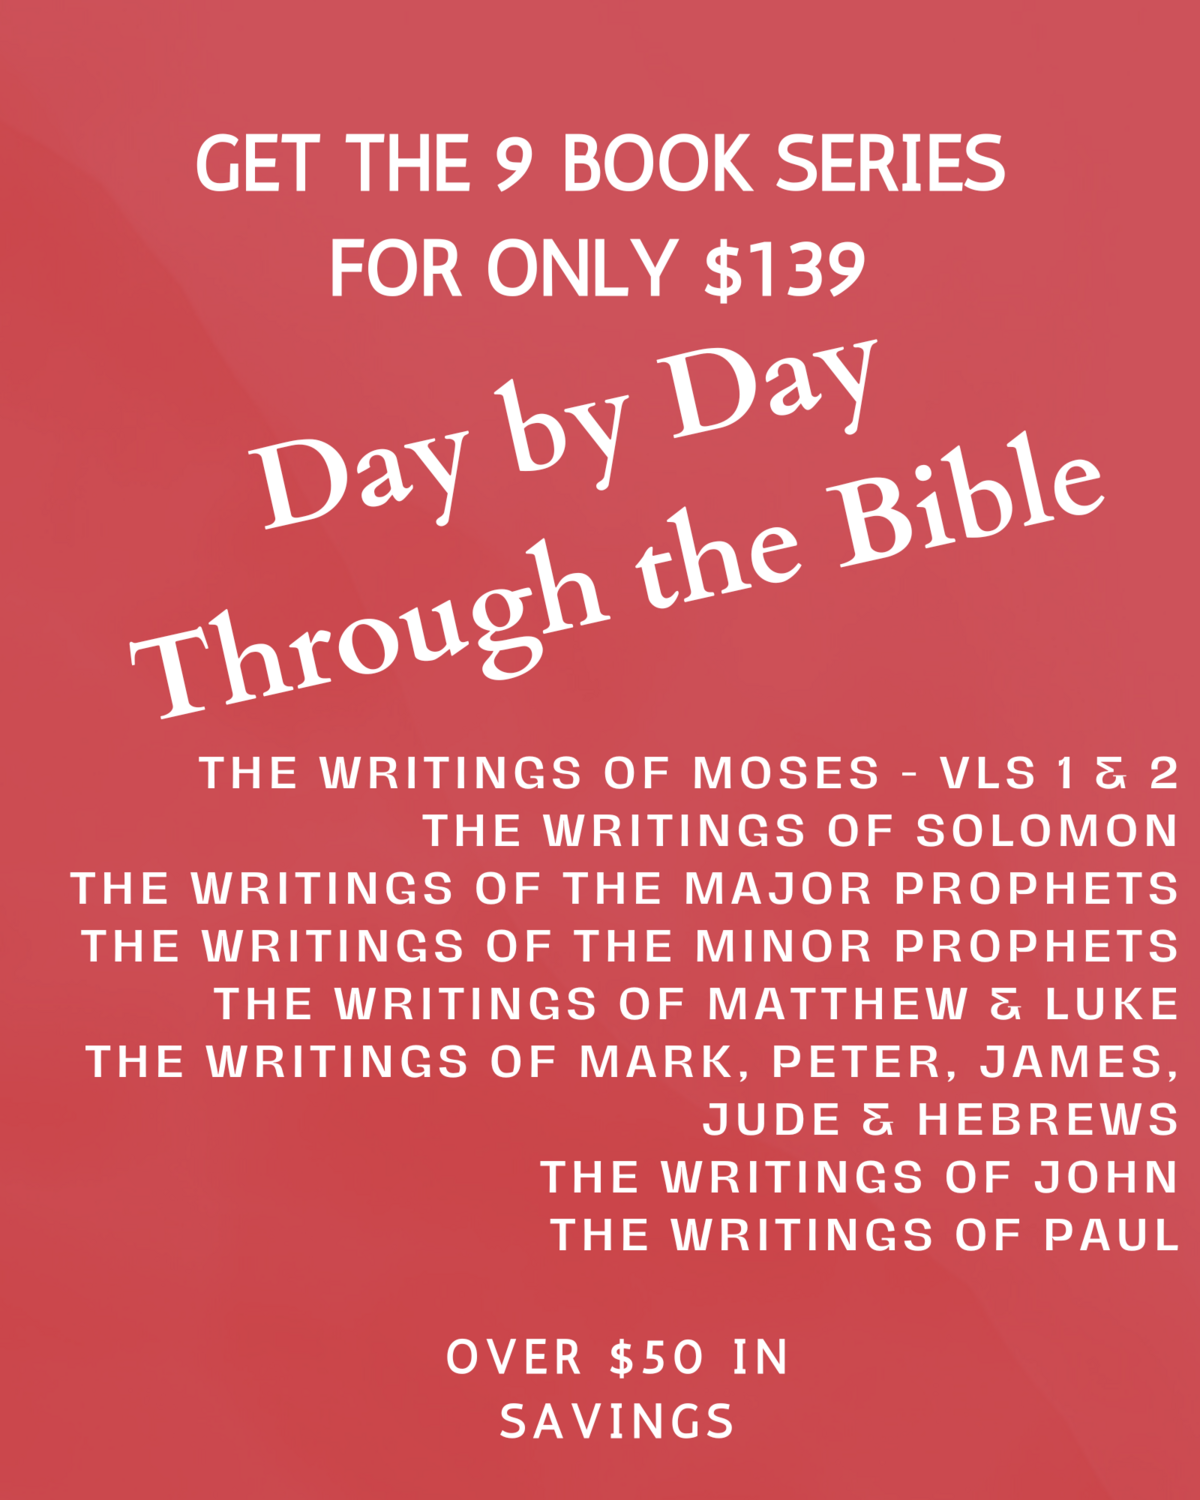 Day By Day Through the Bible - 9 Book Series